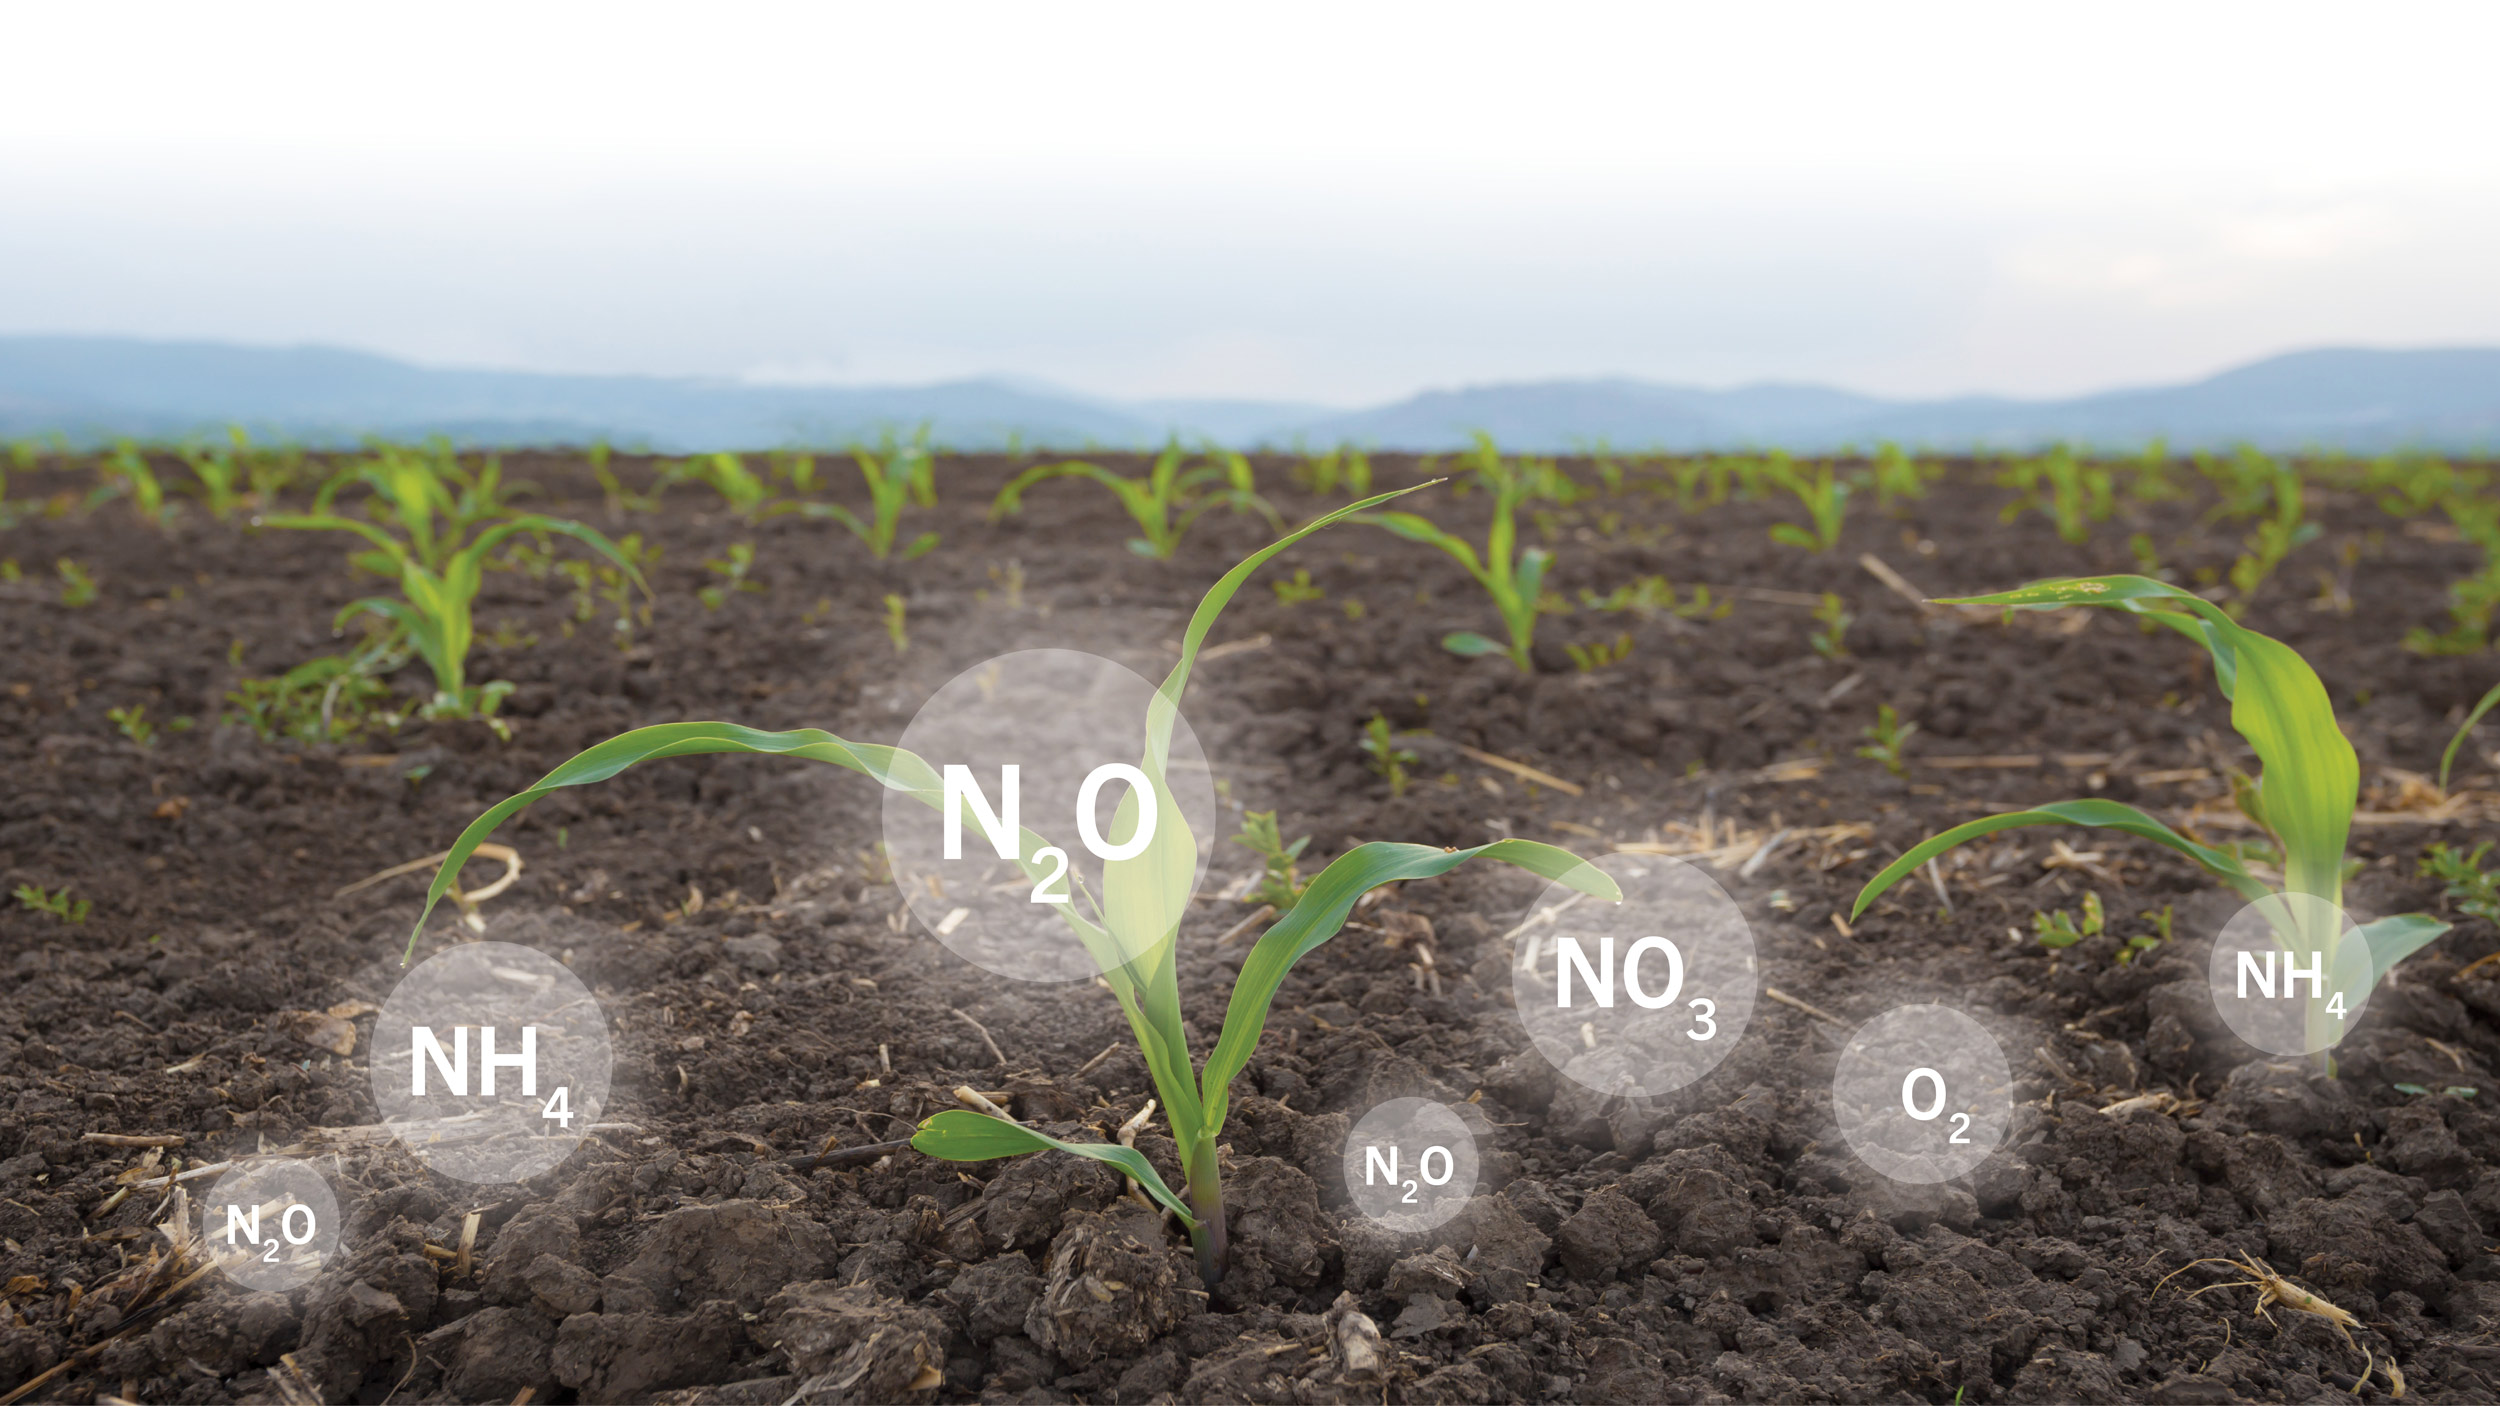 Photo illustration of how stake-based sensors could measure gases in the soil